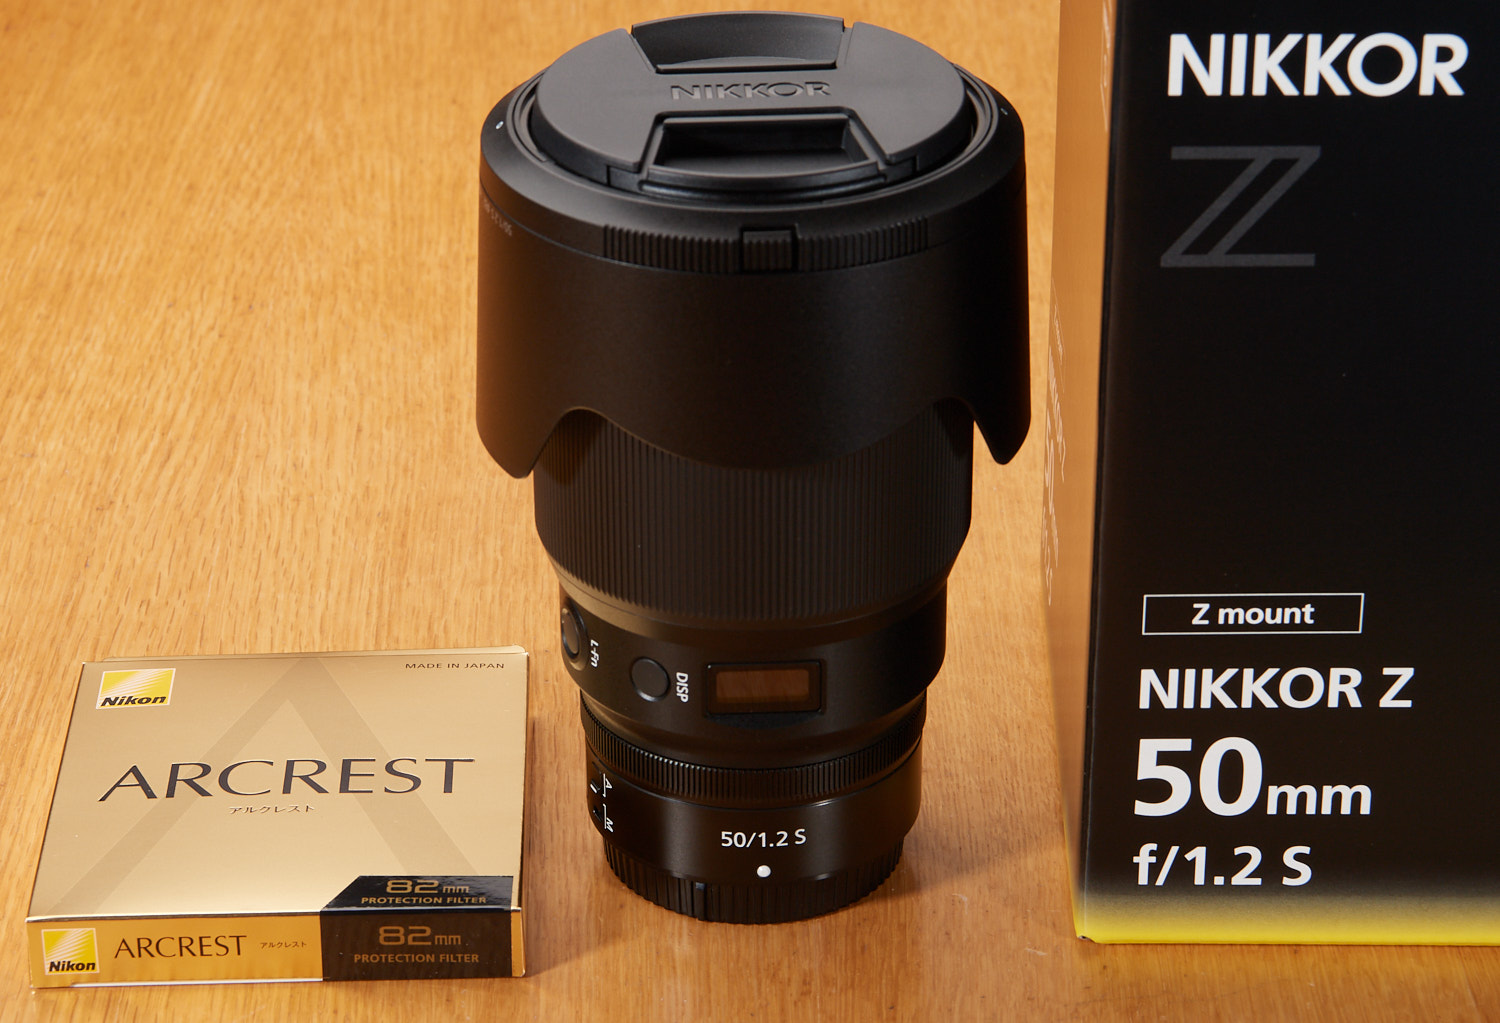 NIKKOR Z 50mm f/1.2 S、ニコンARCREST（アルクレスト）保護フィルター